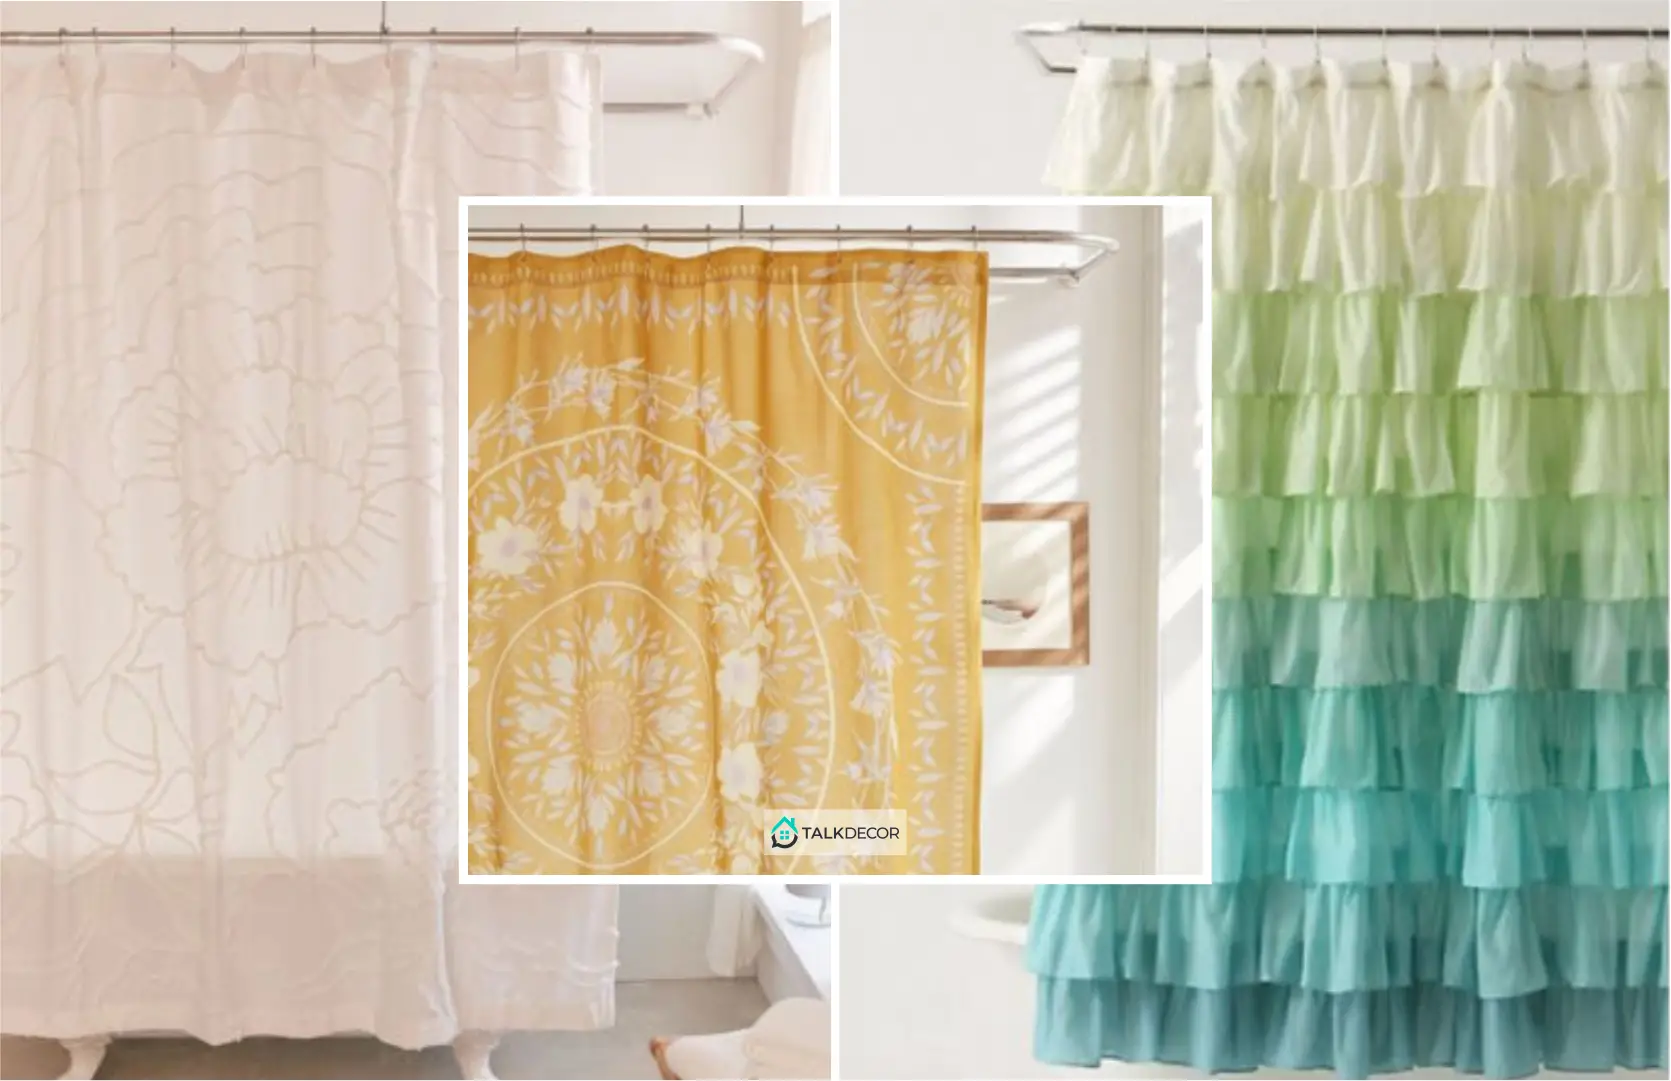 45 Ideas for Your Shower Curtain